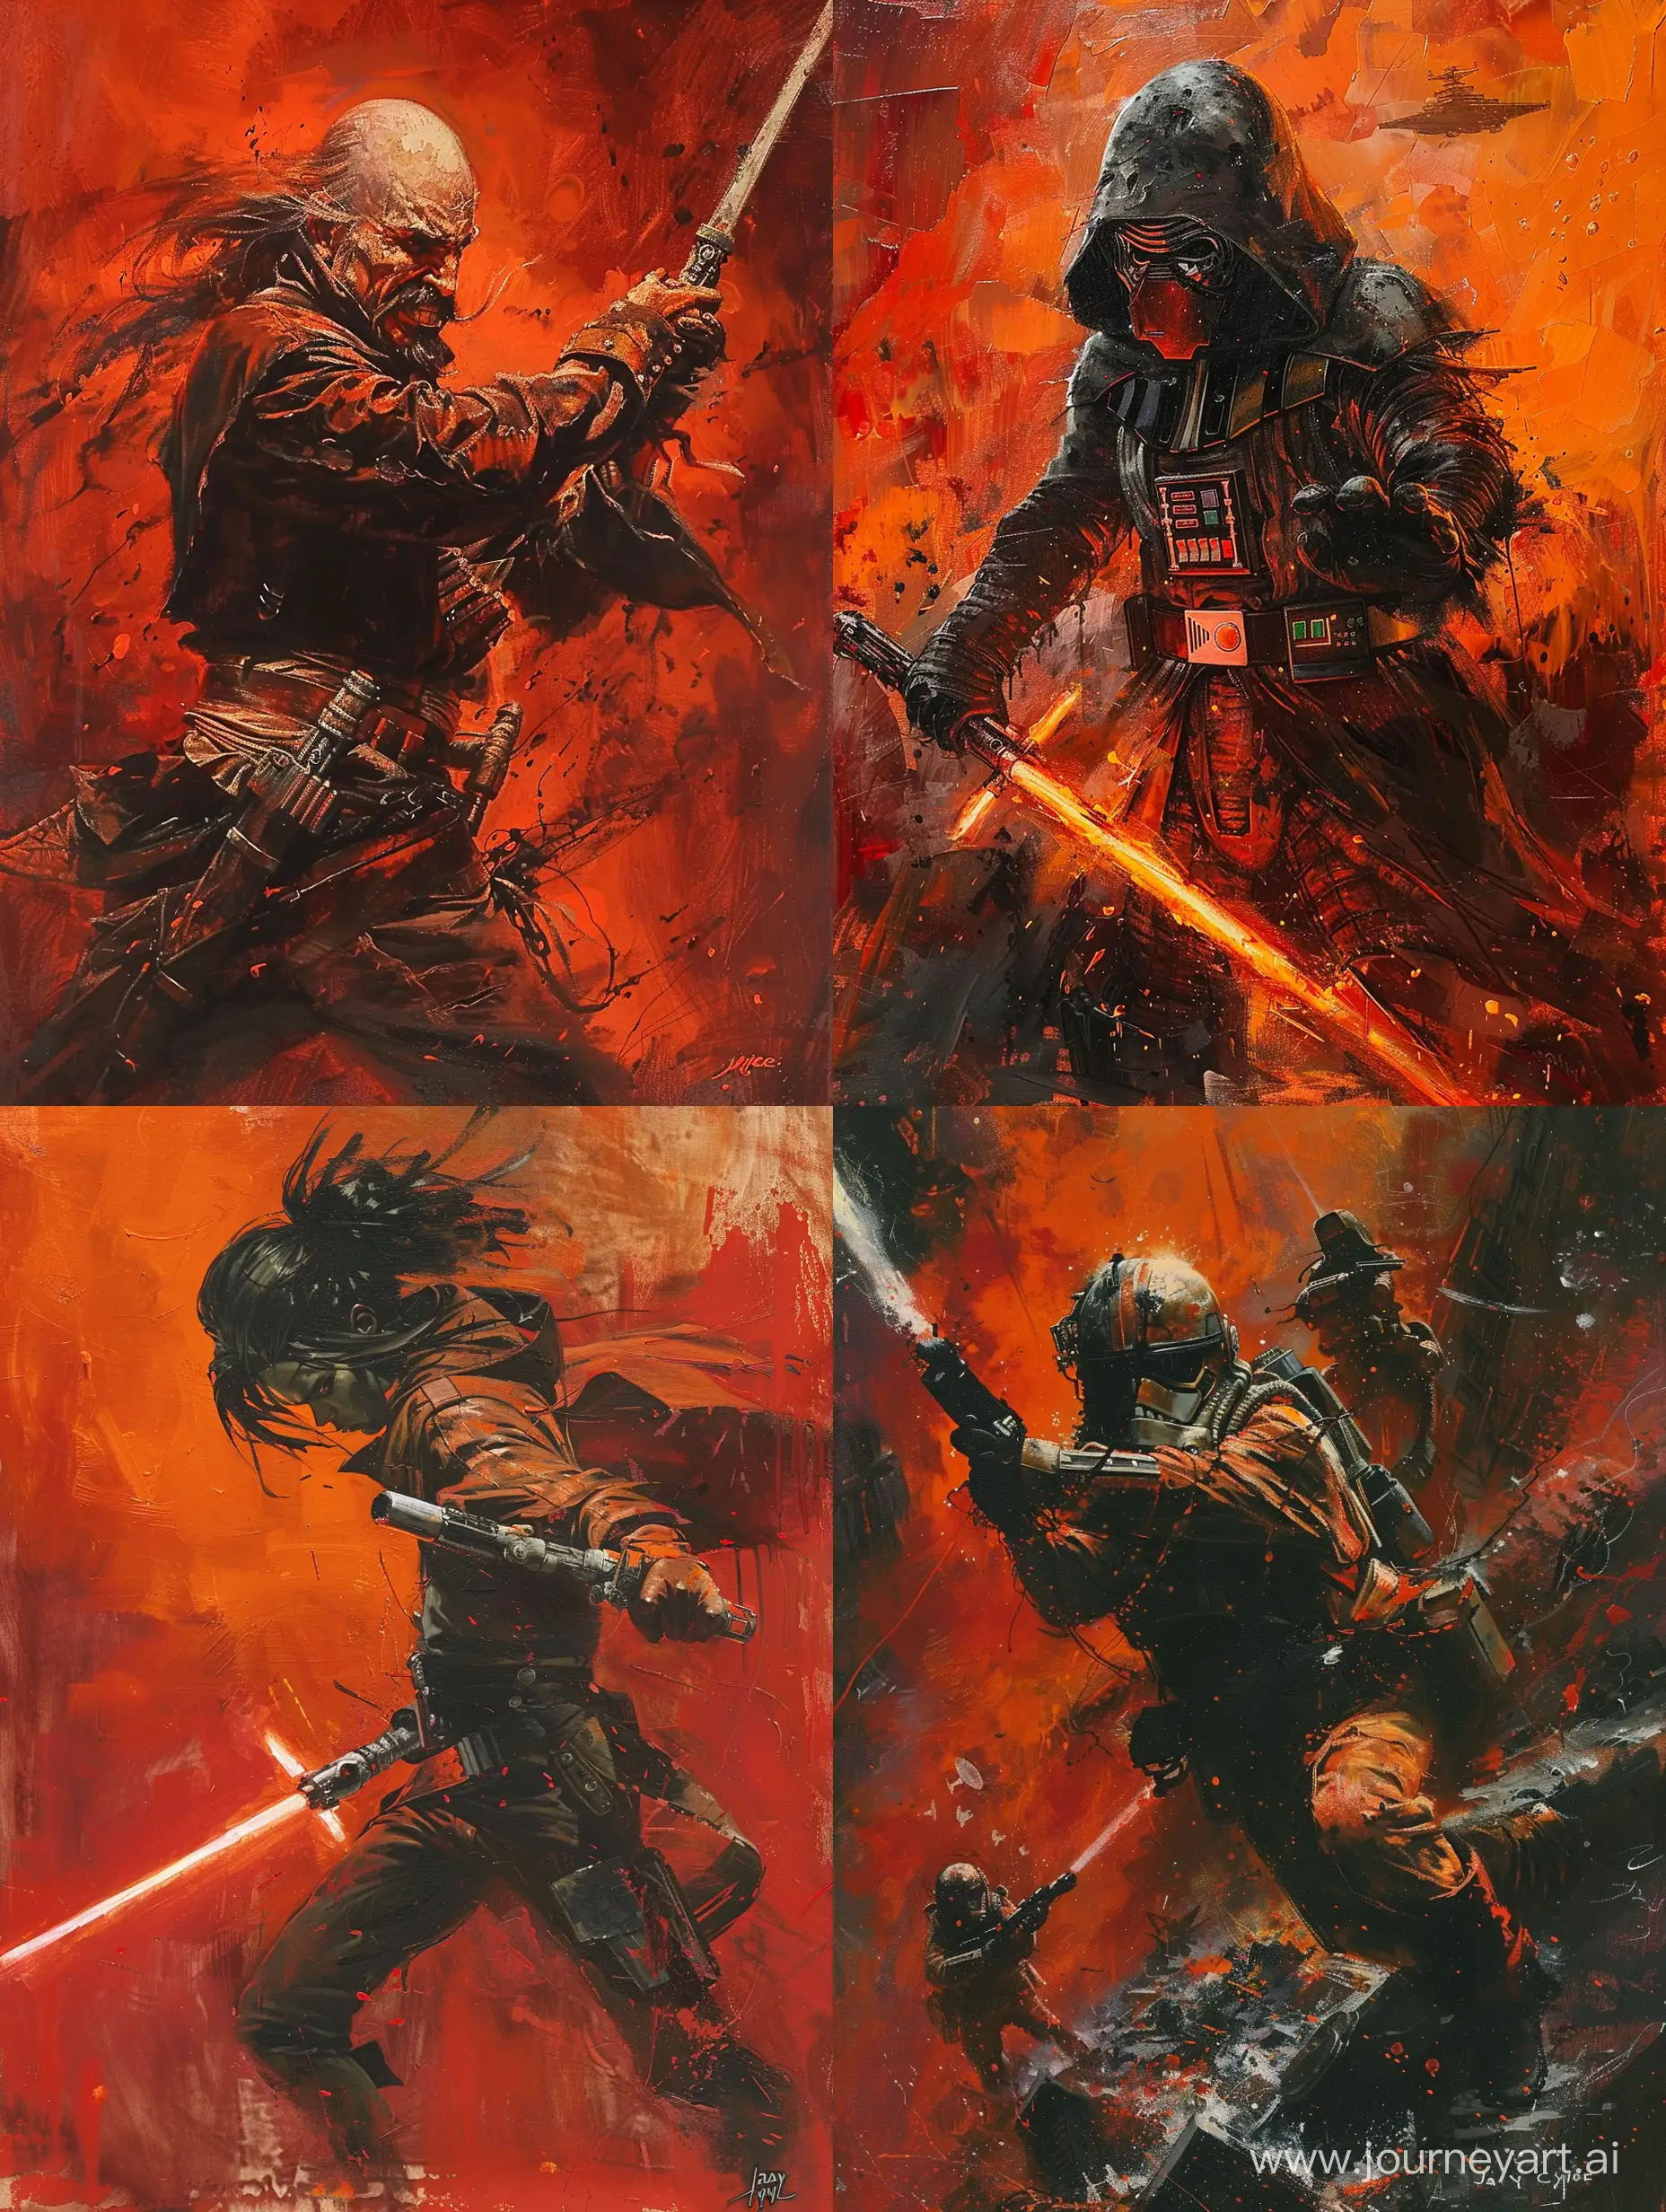 jay cyne art book star wars cover art, in the style of adonna khare, dark red and orange, jeff easley, piratepunk, frenzied action painting, michael hussar, realist detail